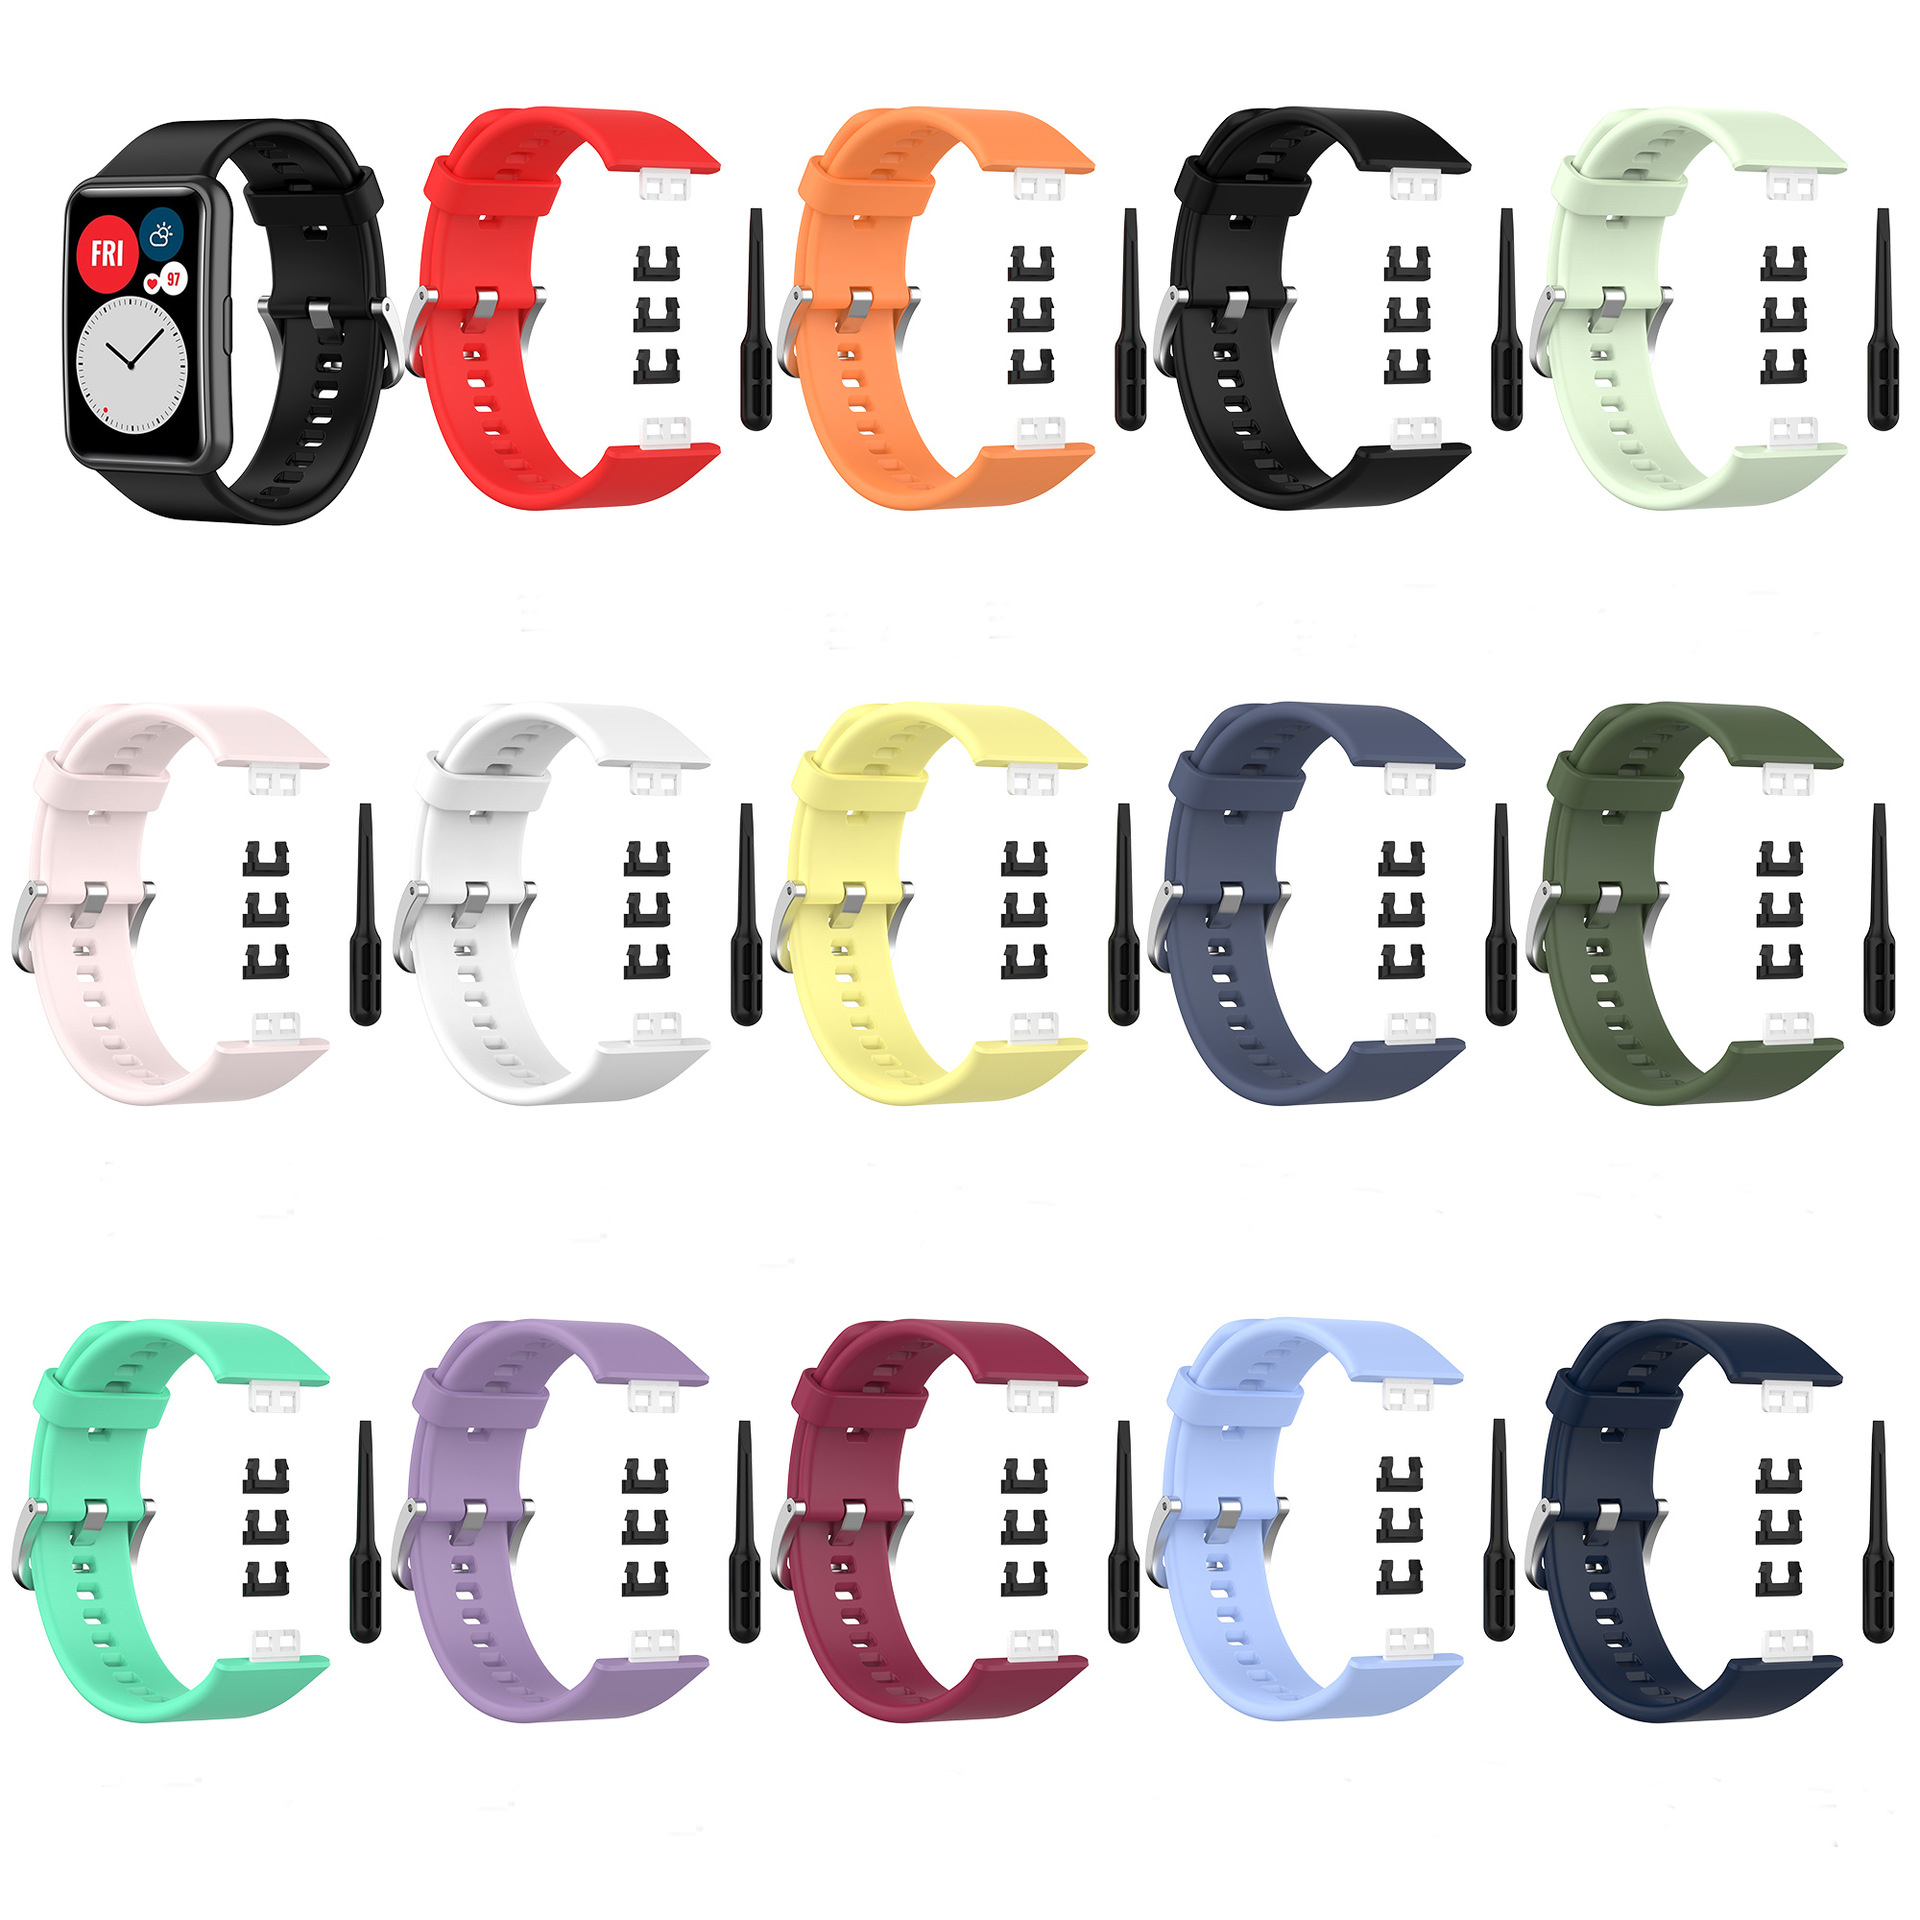 Bakeey-Multi-color-Silicone-Replacement-Strap-Smart-Watch-Band-For-Huawei-Watch-Fit-1782936-1